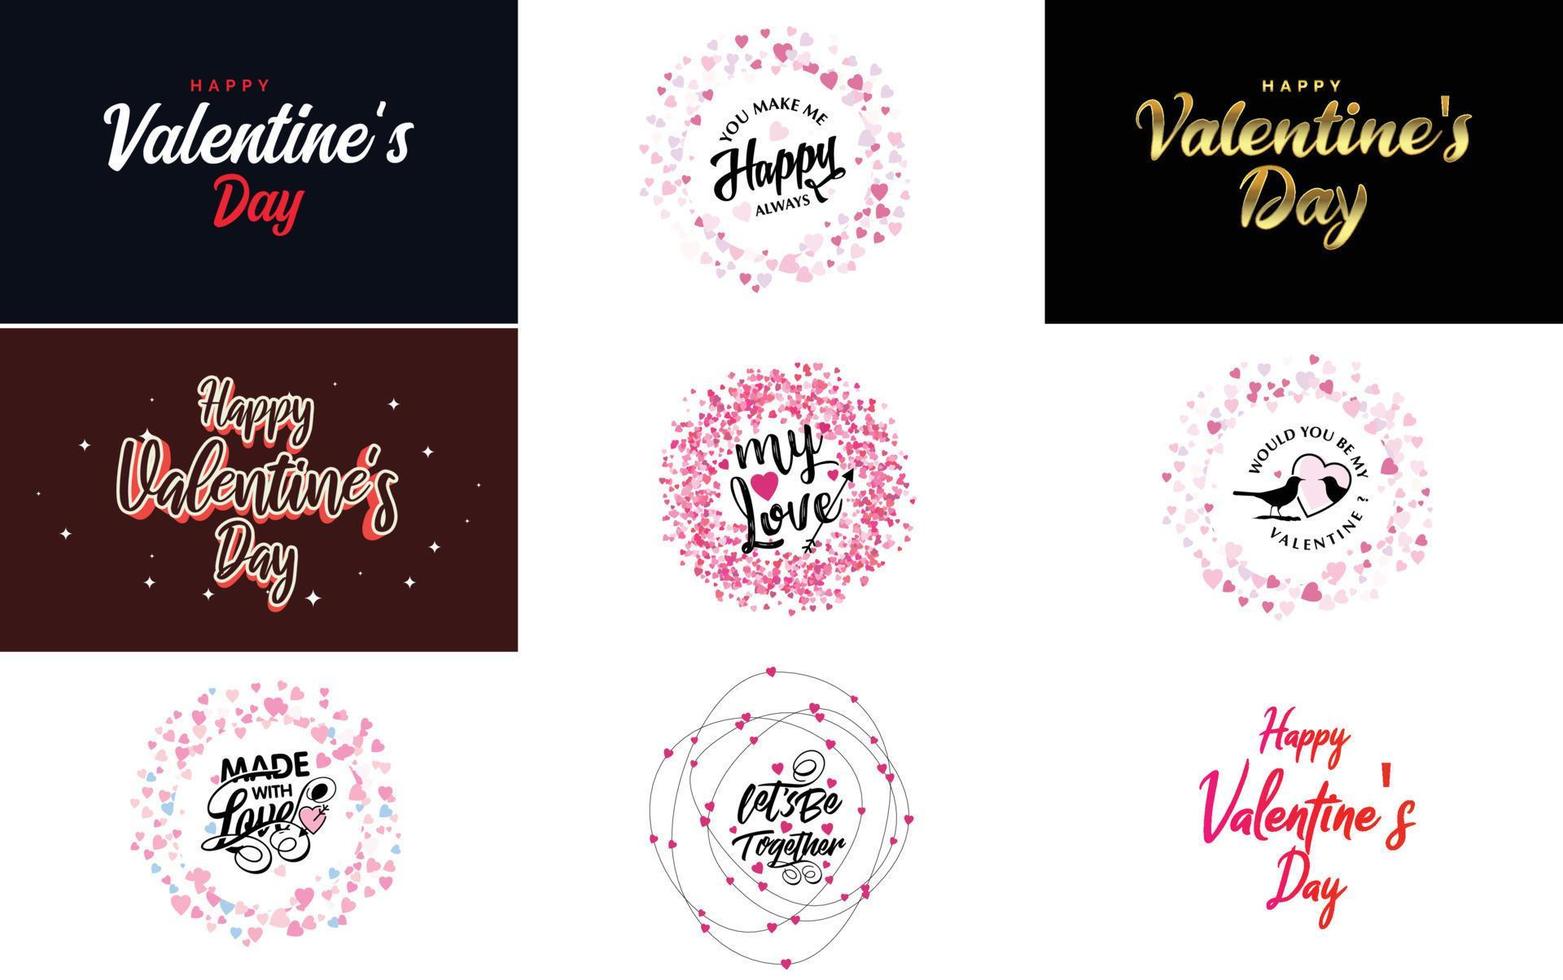 Happy Valentine's Day typography poster with handwritten calligraphy text. isolated on white background vector